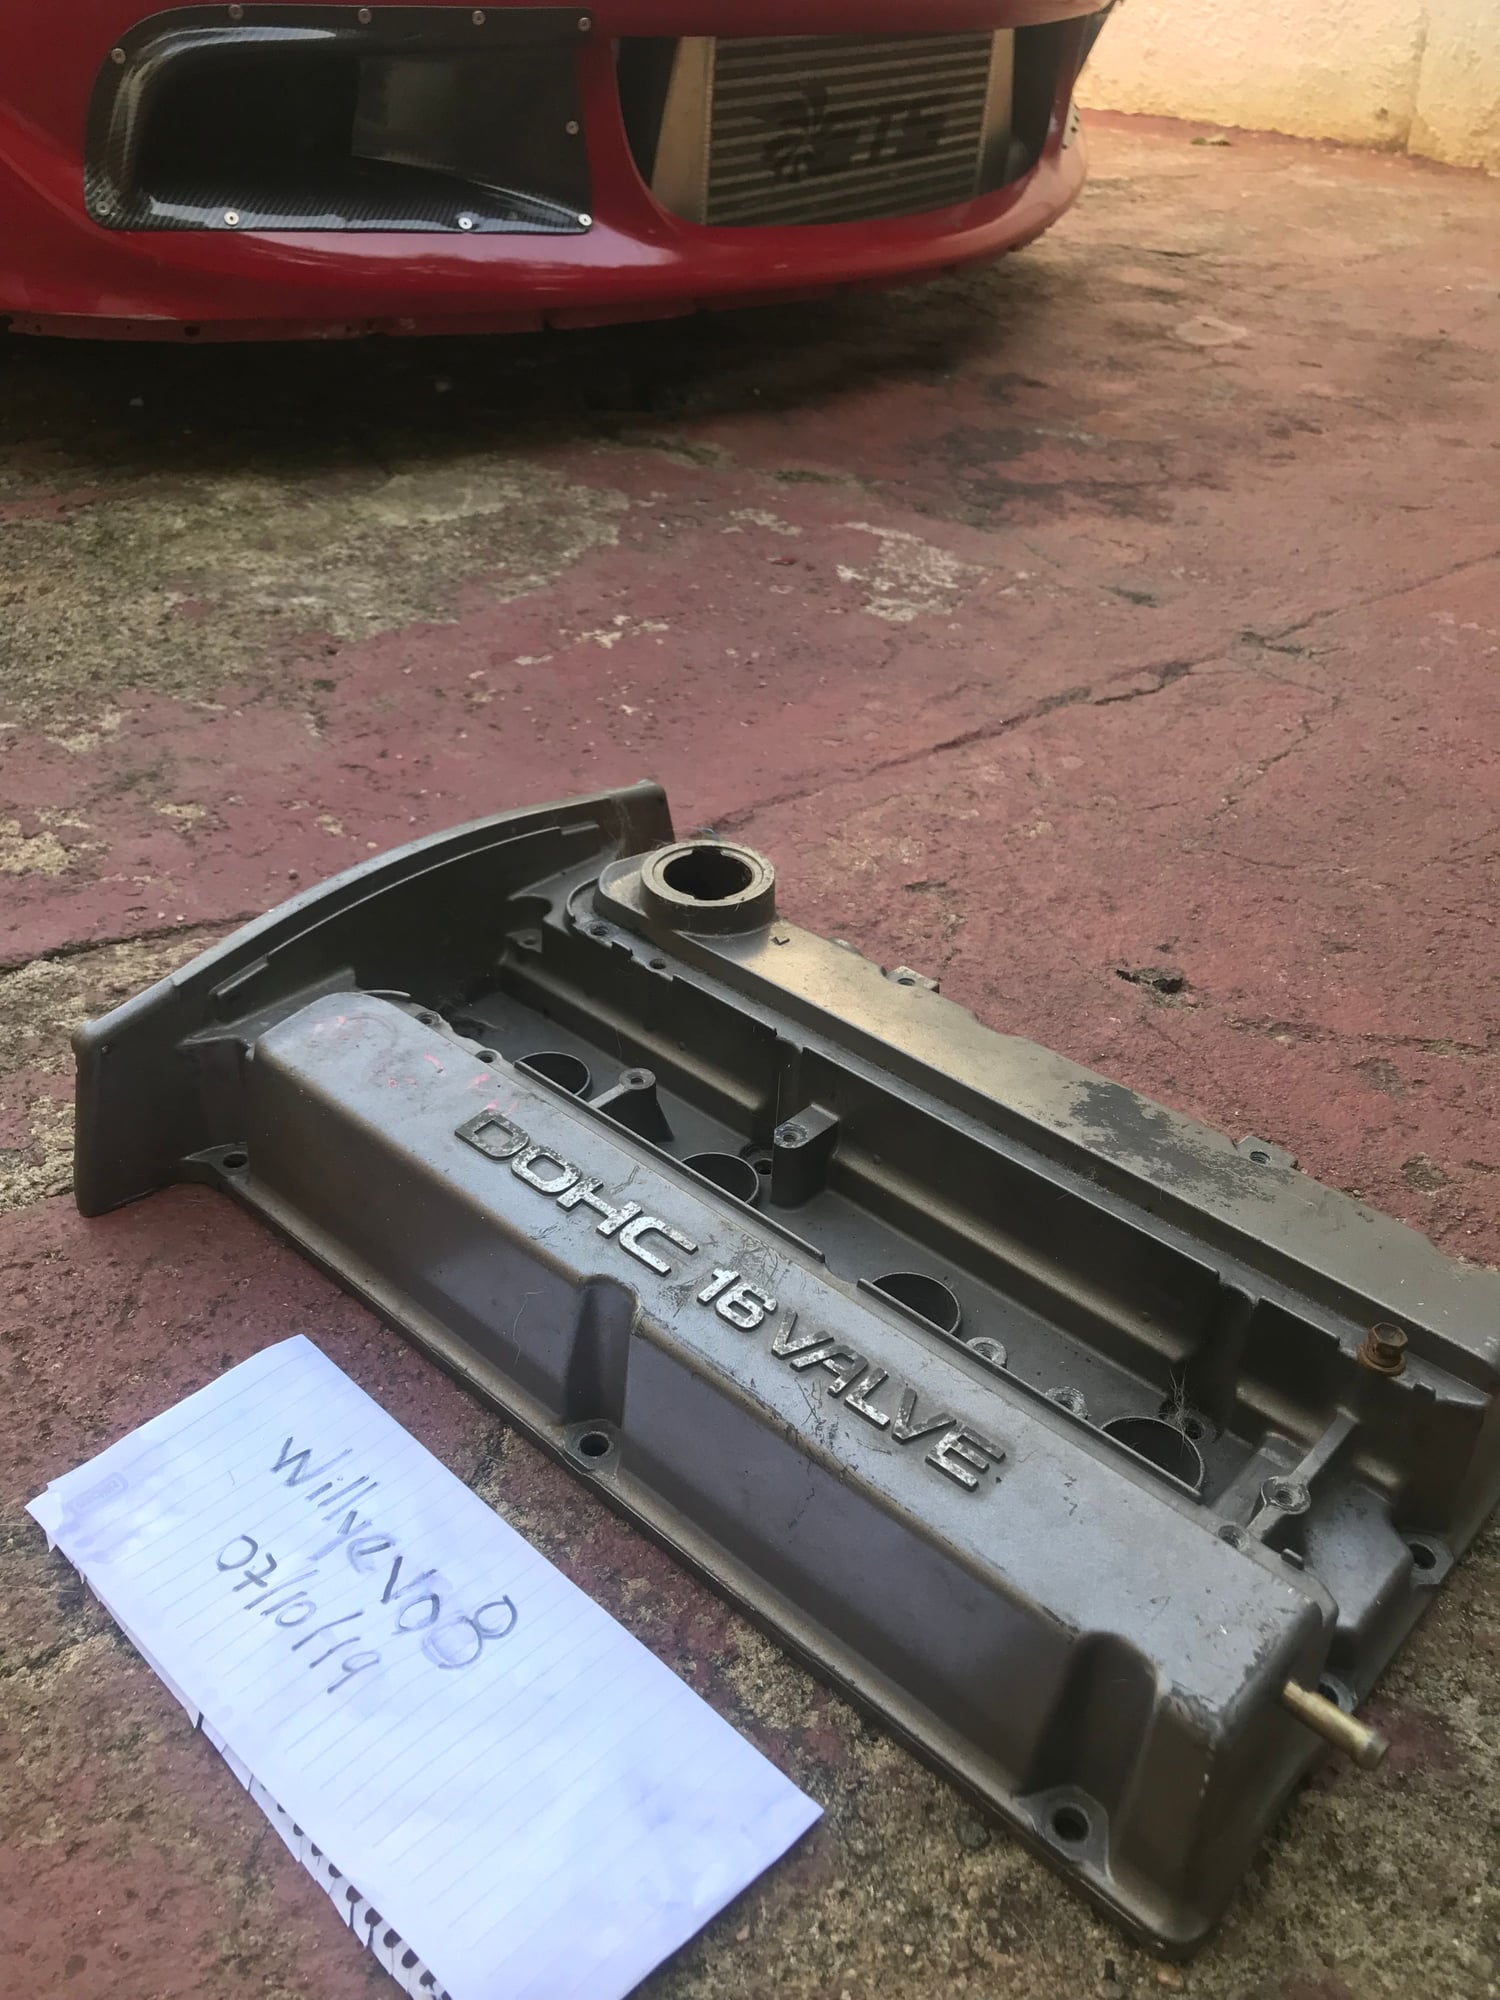 Accessories - Oem parts for sale - Used - All Years Mitsubishi Lancer Evolution - Miami, FL 33191, United States